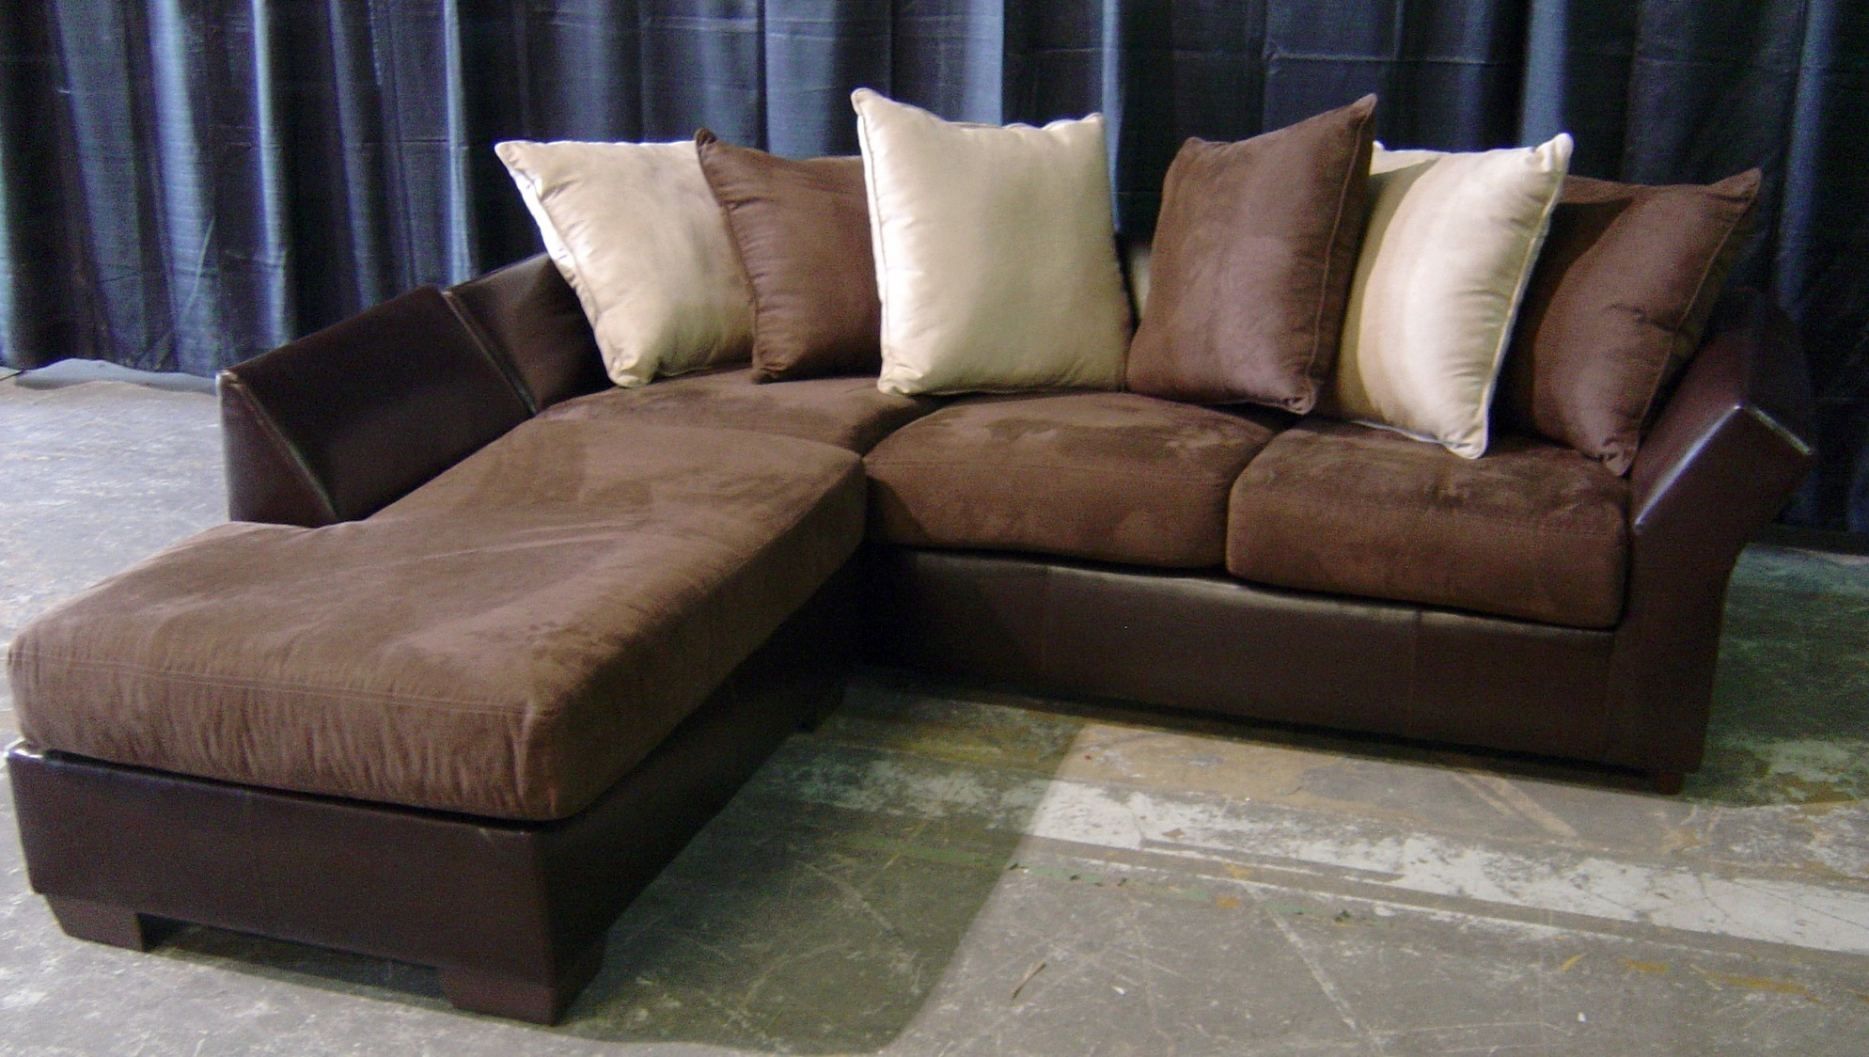 Faux Suede Couch | Tirtagucipool With Regard To Faux Suede Sofas (Photo 9 of 10)